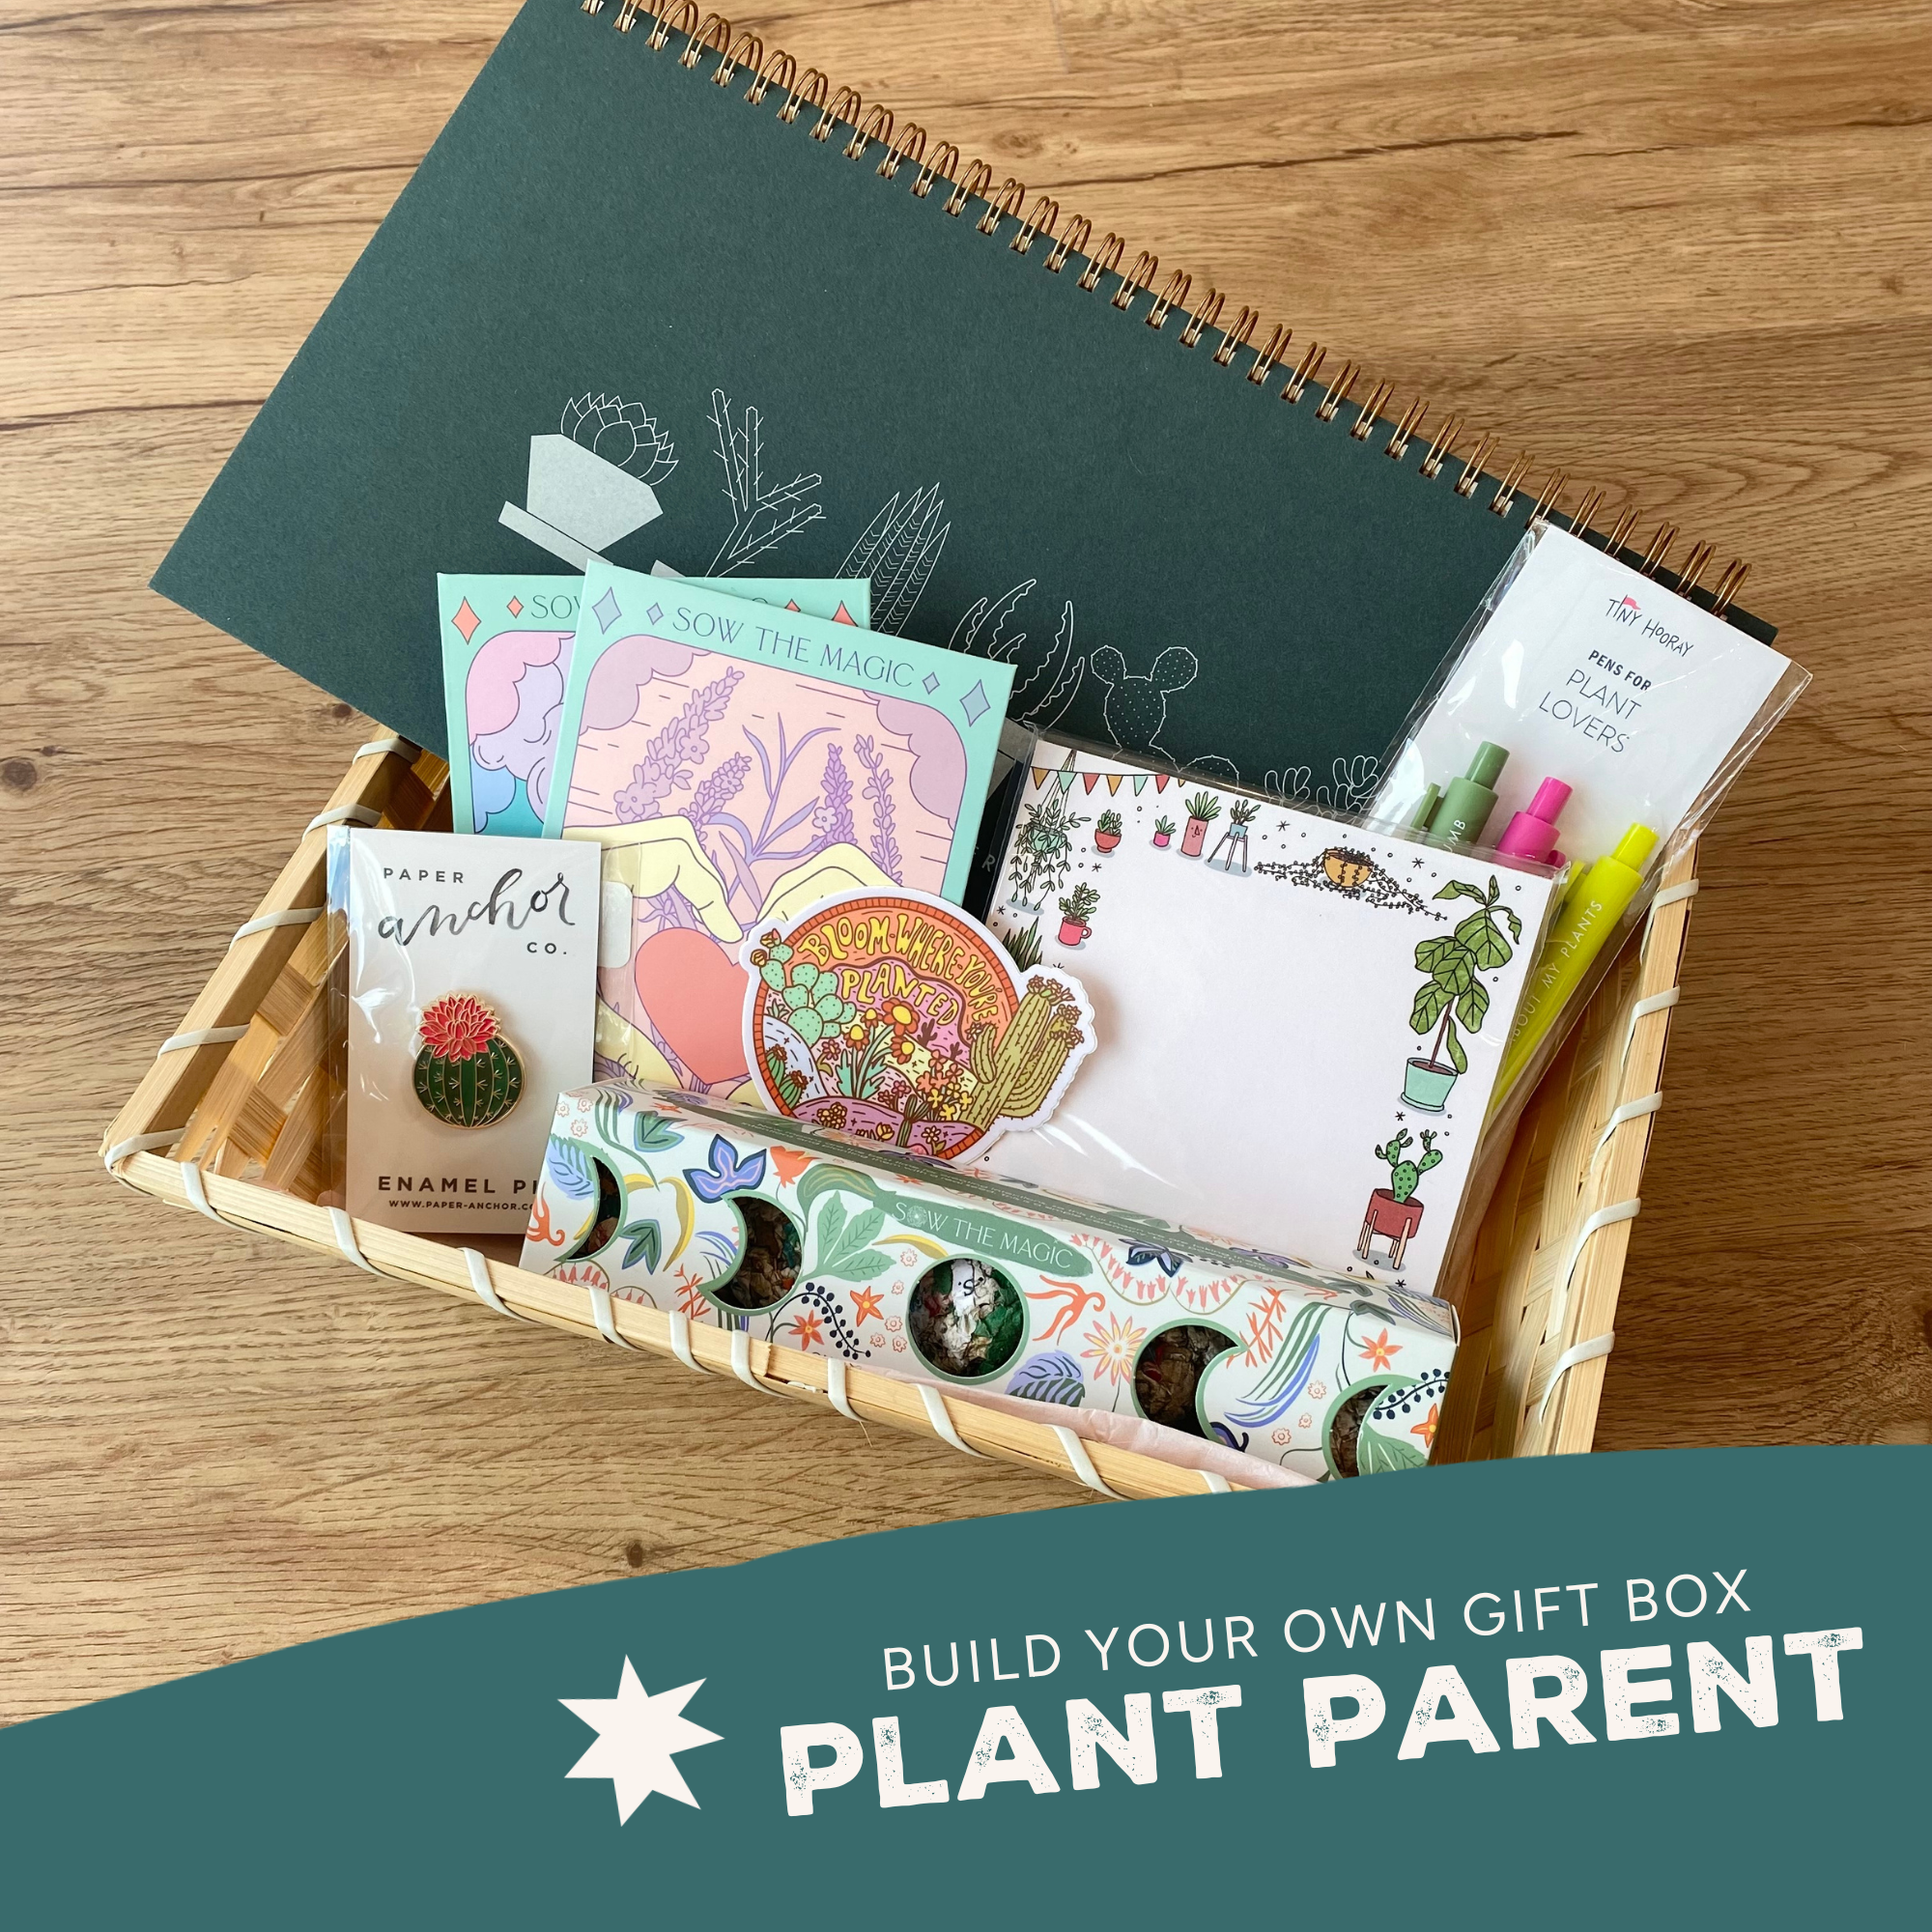 For a Plant Parent: Build Your Own Gift Box